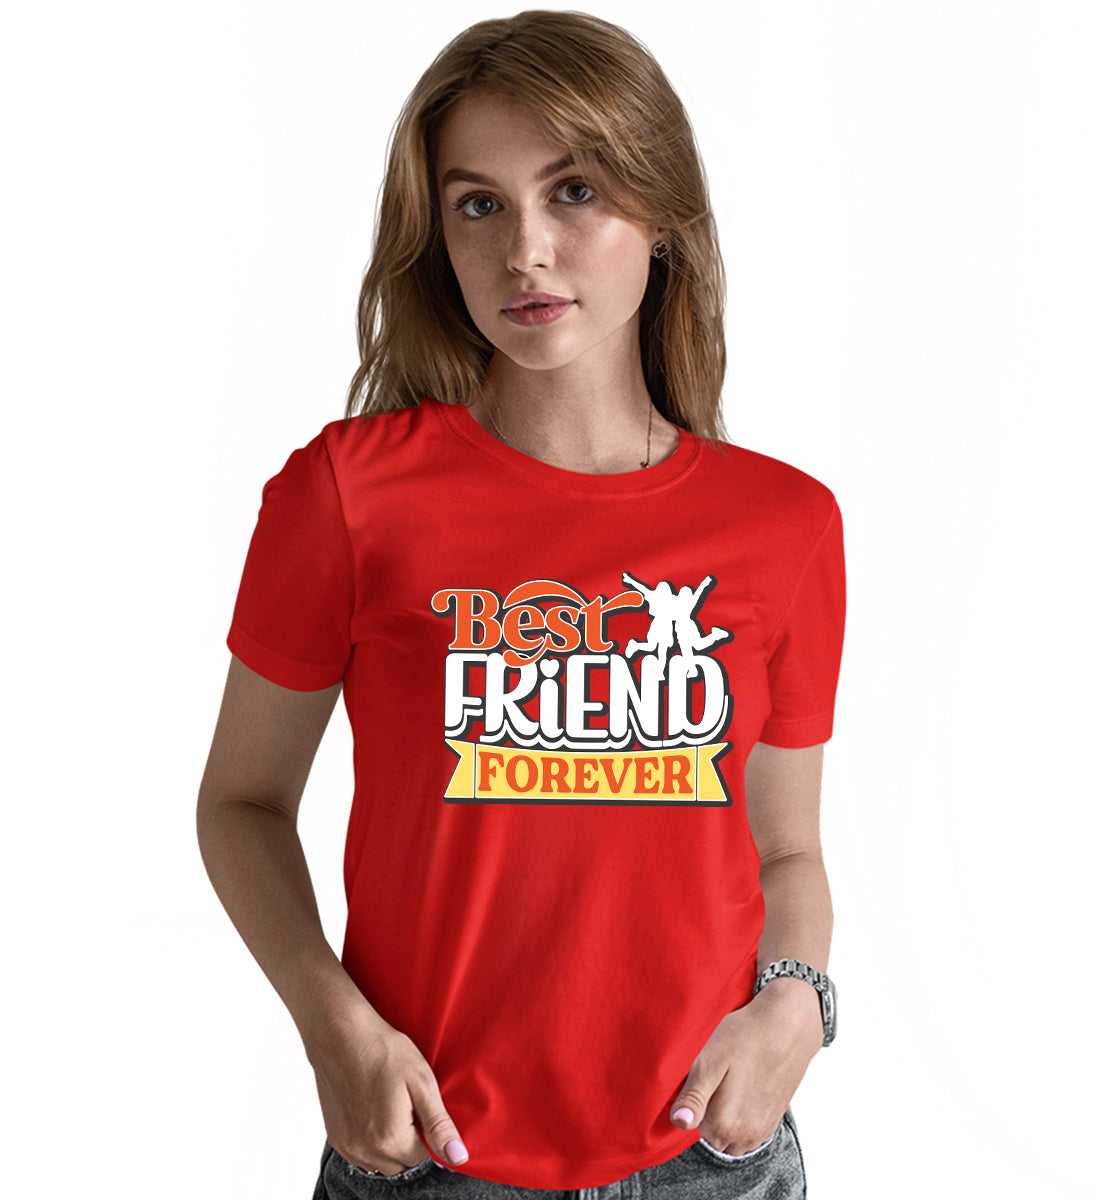 Friends Crew Matching Printed Tshirts (Pack Of 3)